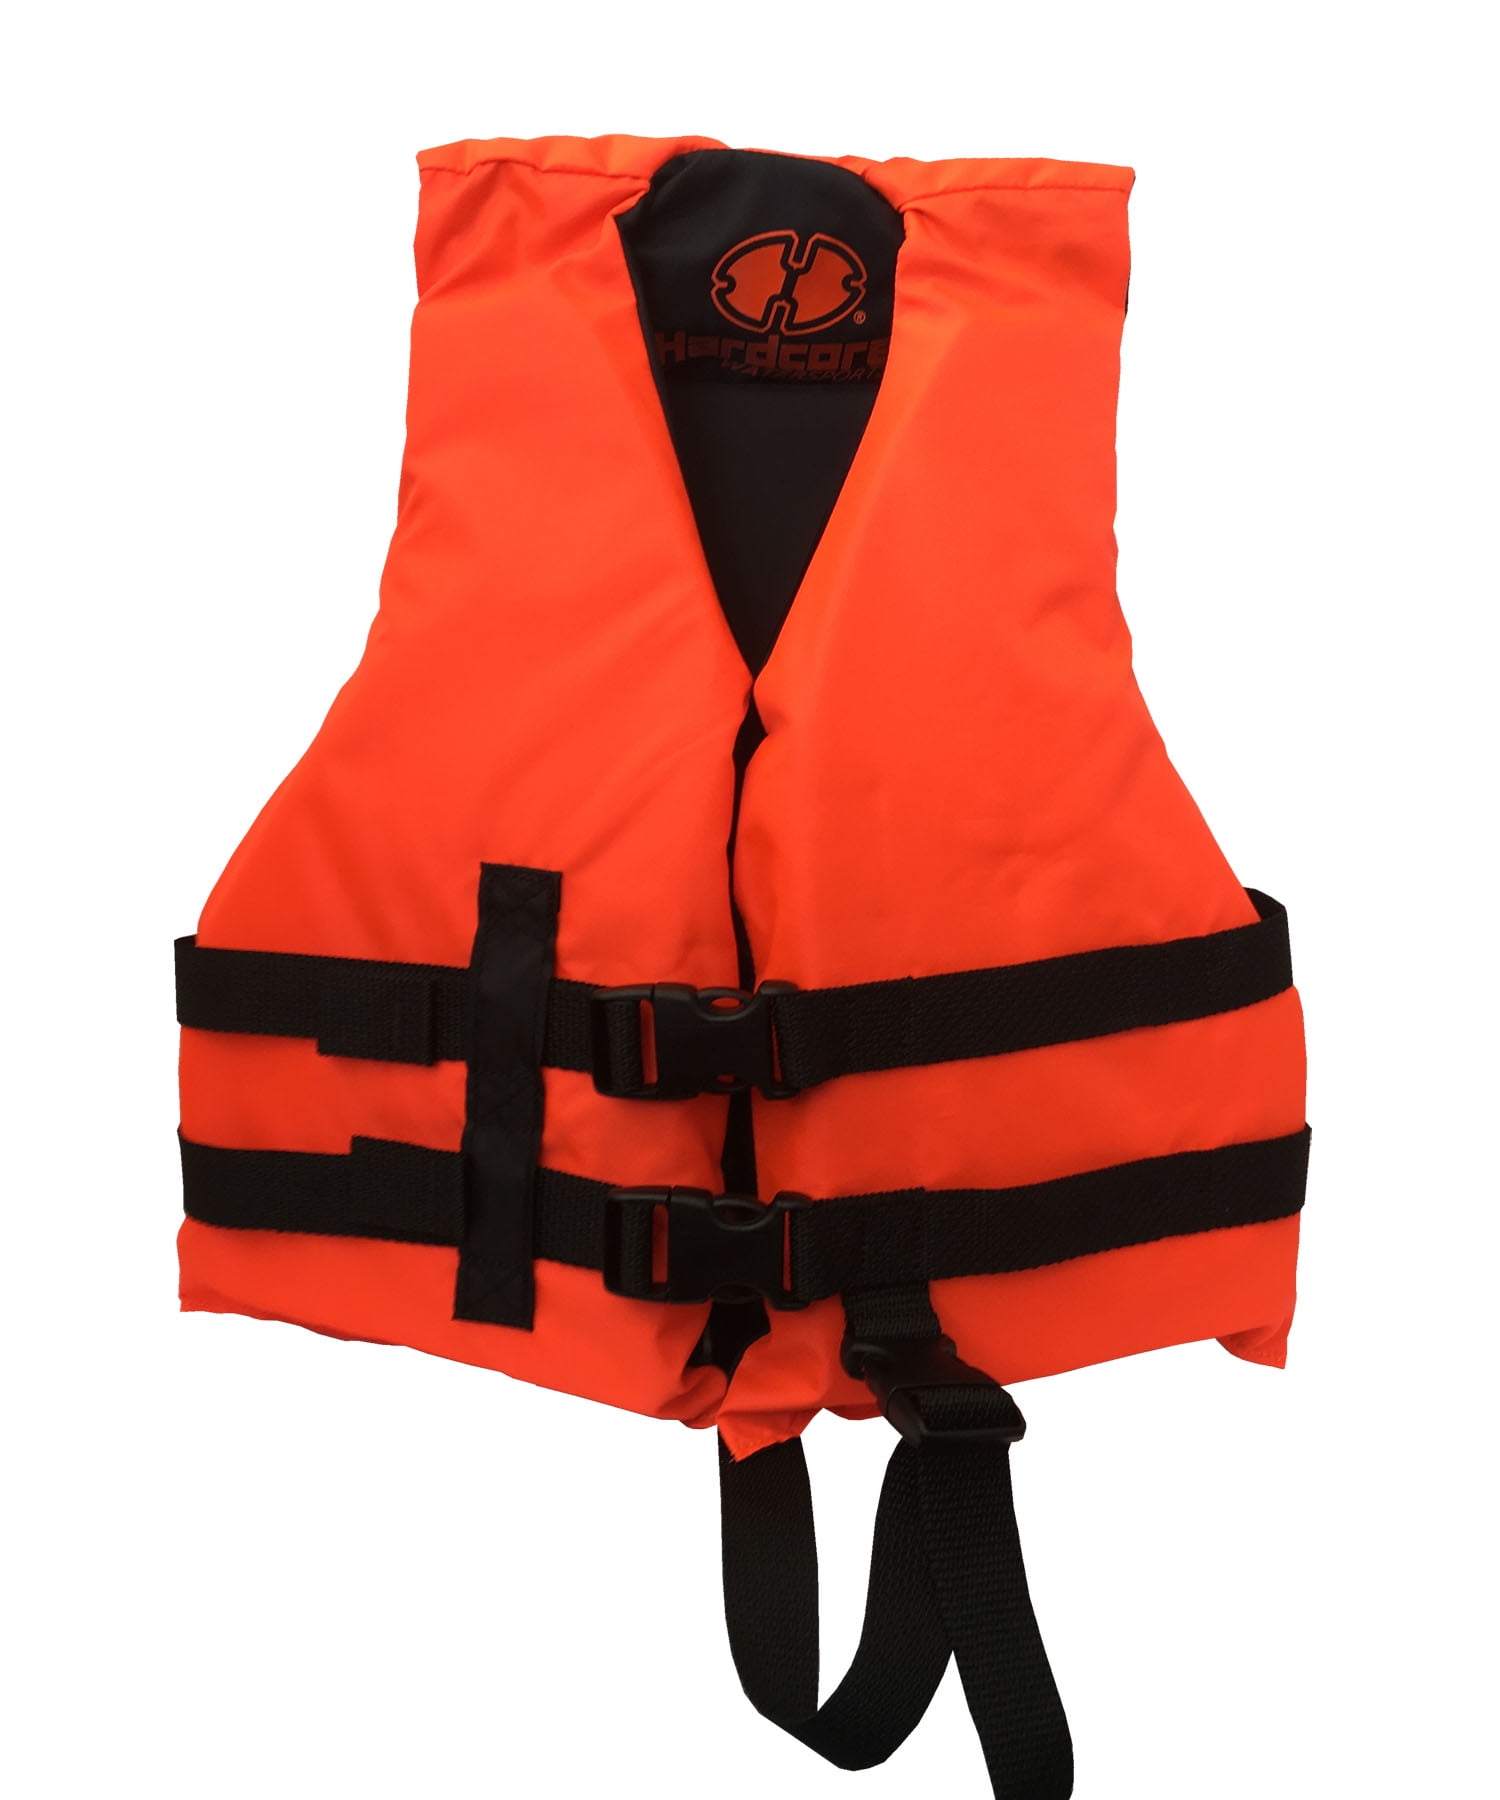 Hardcore Water Sports Hardcore life jacket paddle vest for toddlers and  little kids from 30-50 pounds; Coast Guard approved Type III PFD life vest